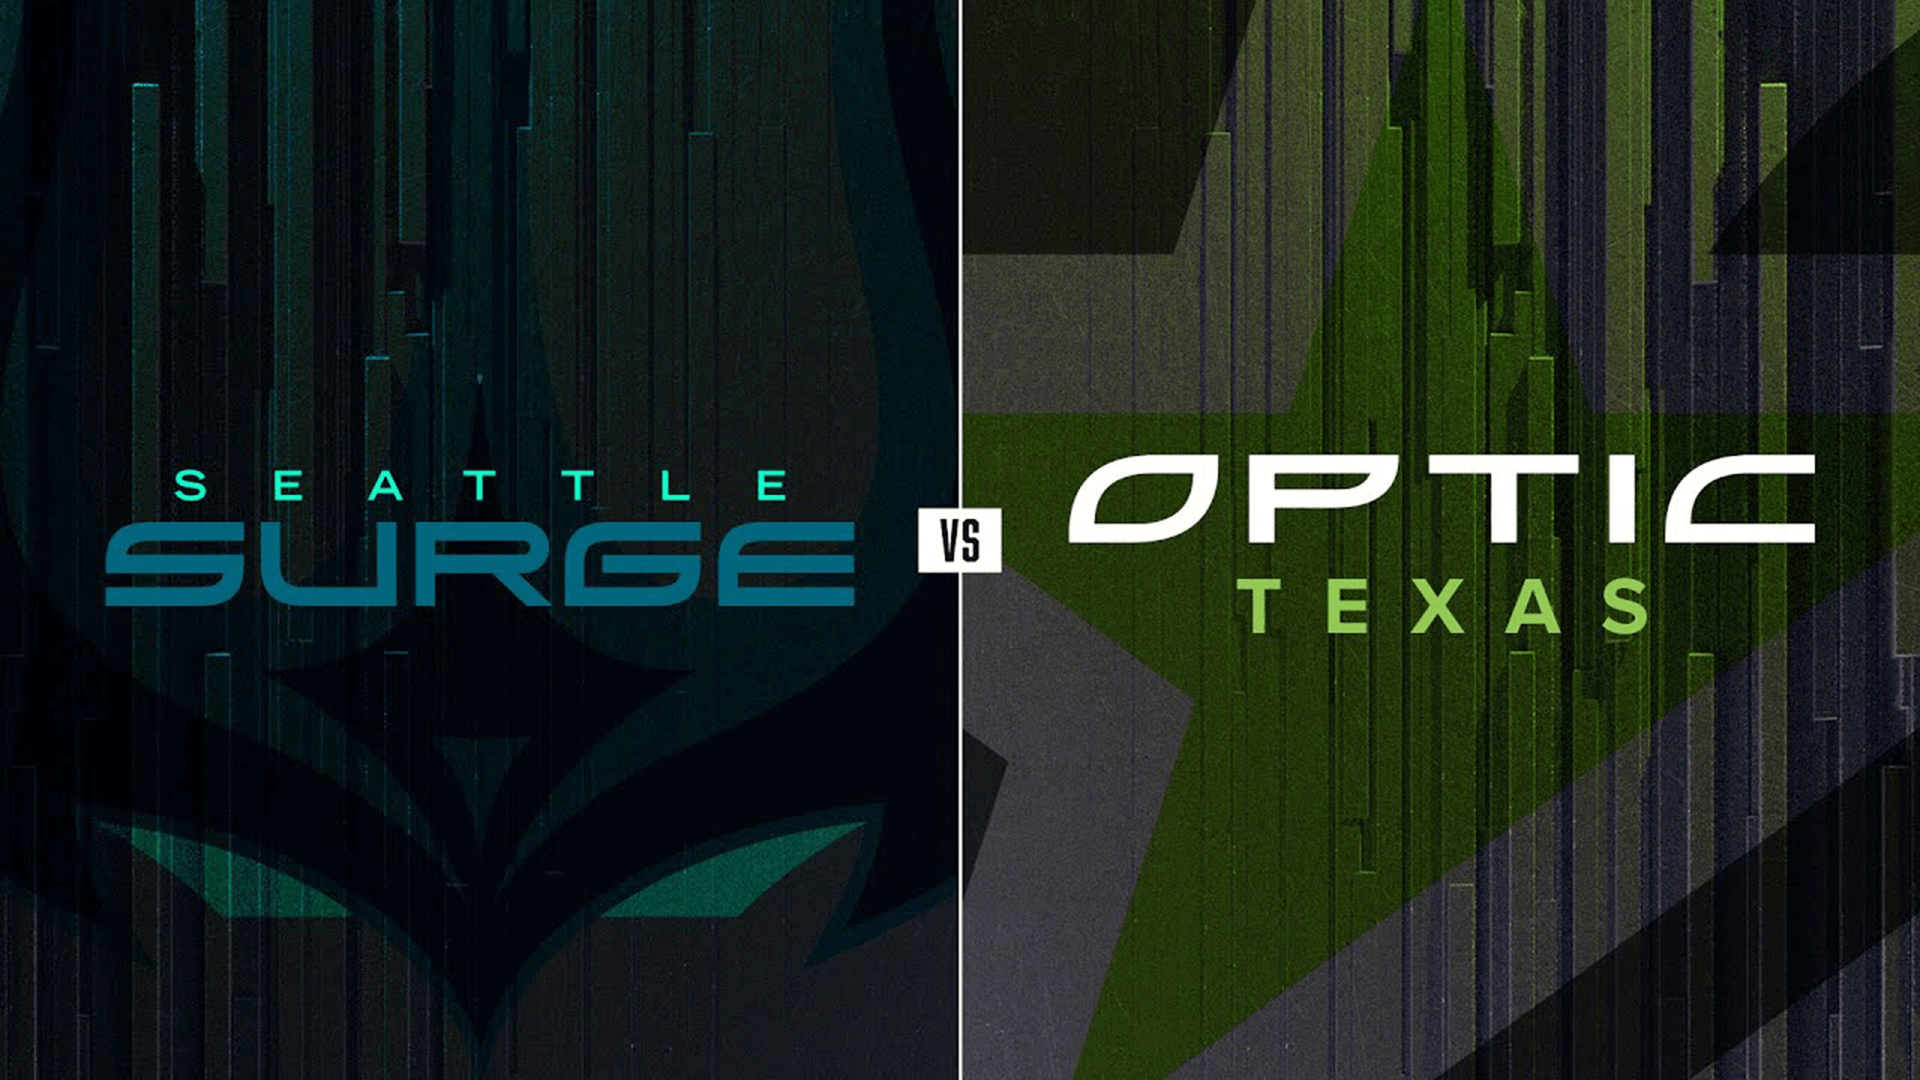 Call of Duty: OpTic Texas defeats Seattle Surge at CDL Major